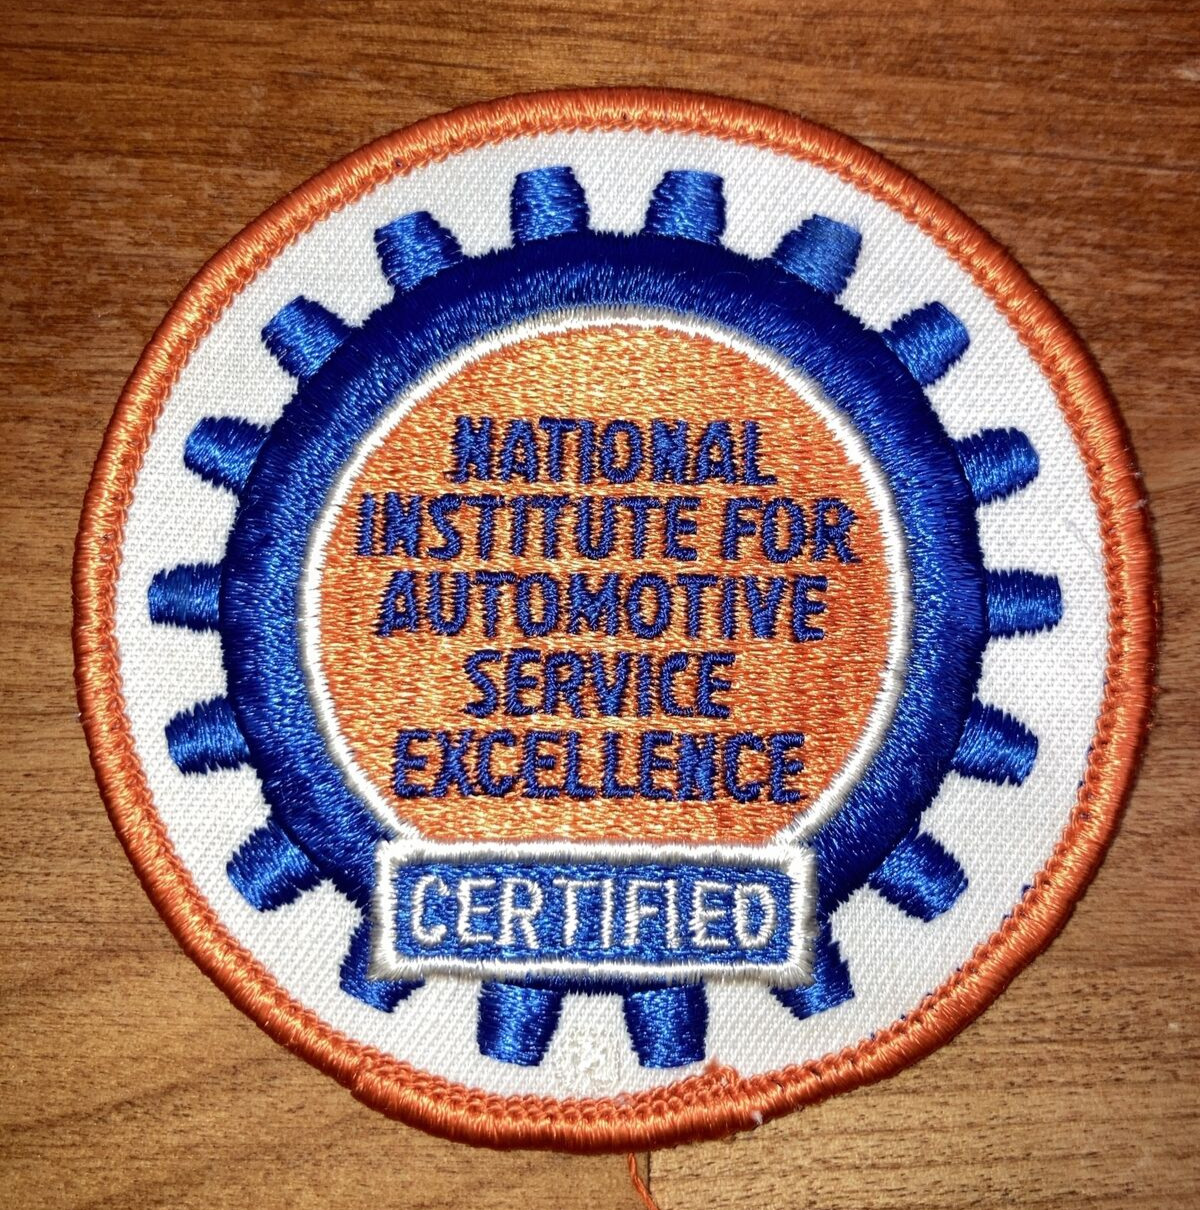 National Institute for Automotive Service Excellence Certified Round Patch Badge